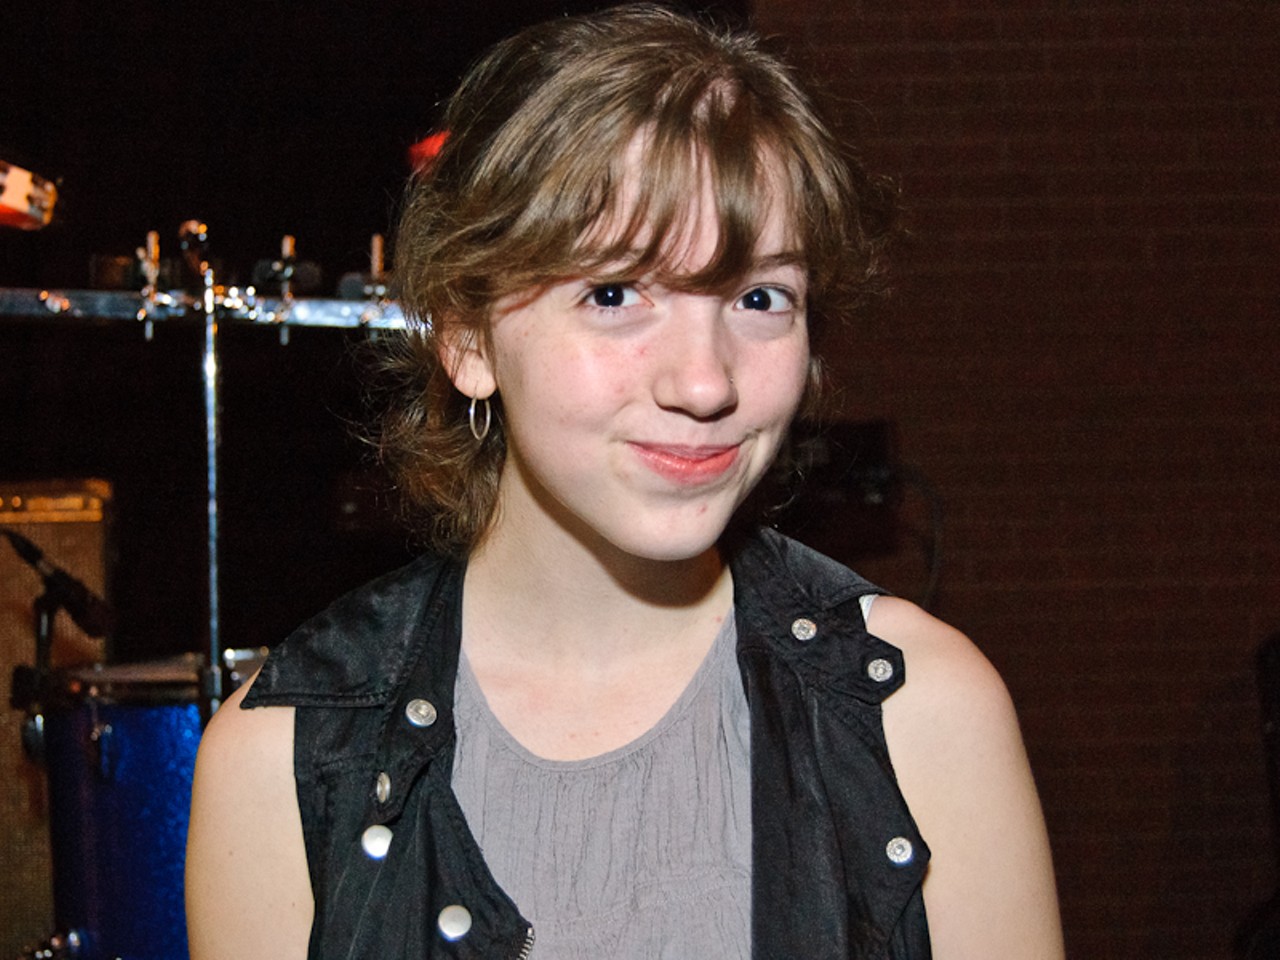 Tess Childress attended the show, &ldquo;to make up for missing them at the Pitchfork Music Festival&rdquo; earlier this year.